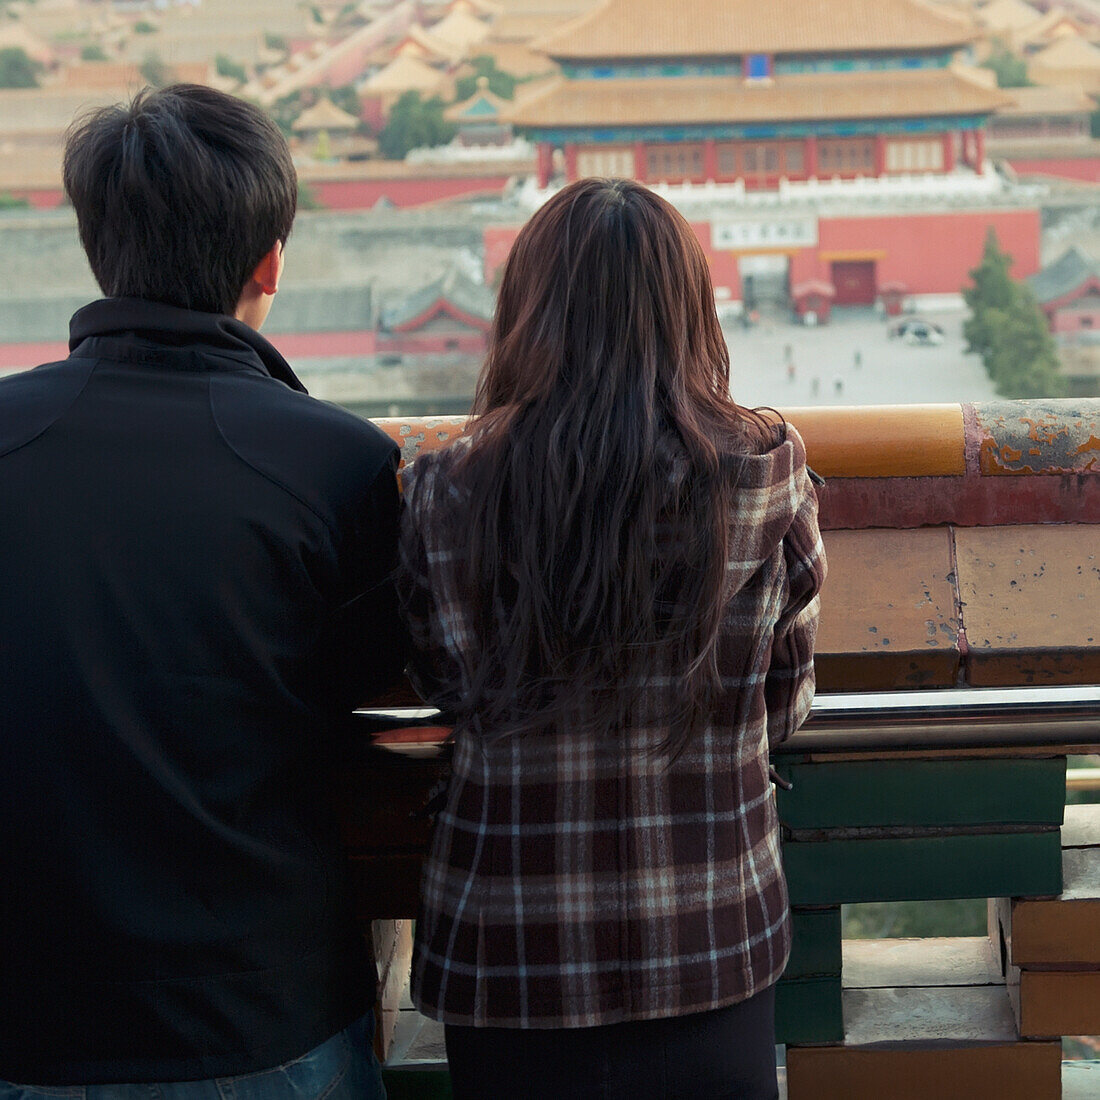 Couple Overlooking Forbidden City From Jingshan Park; Beijing, China